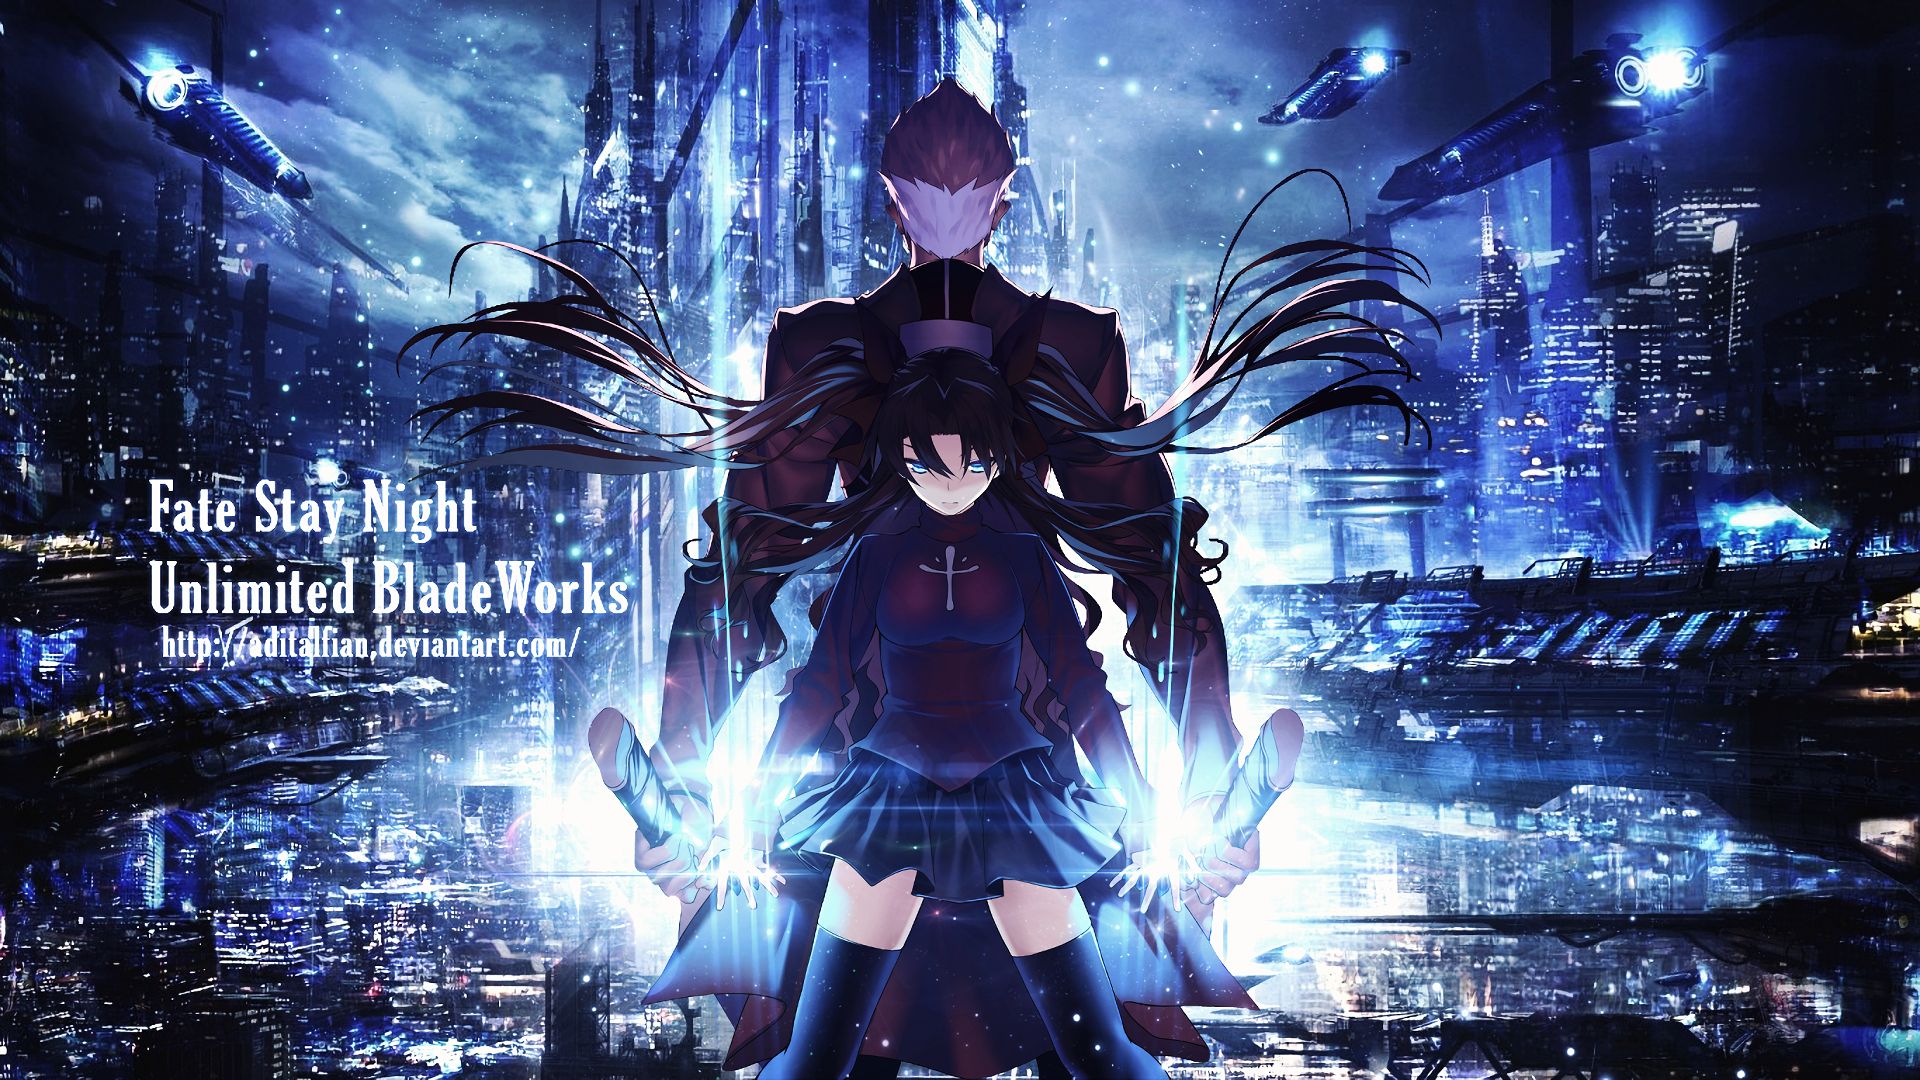 Stay Night Unlimited Blade works